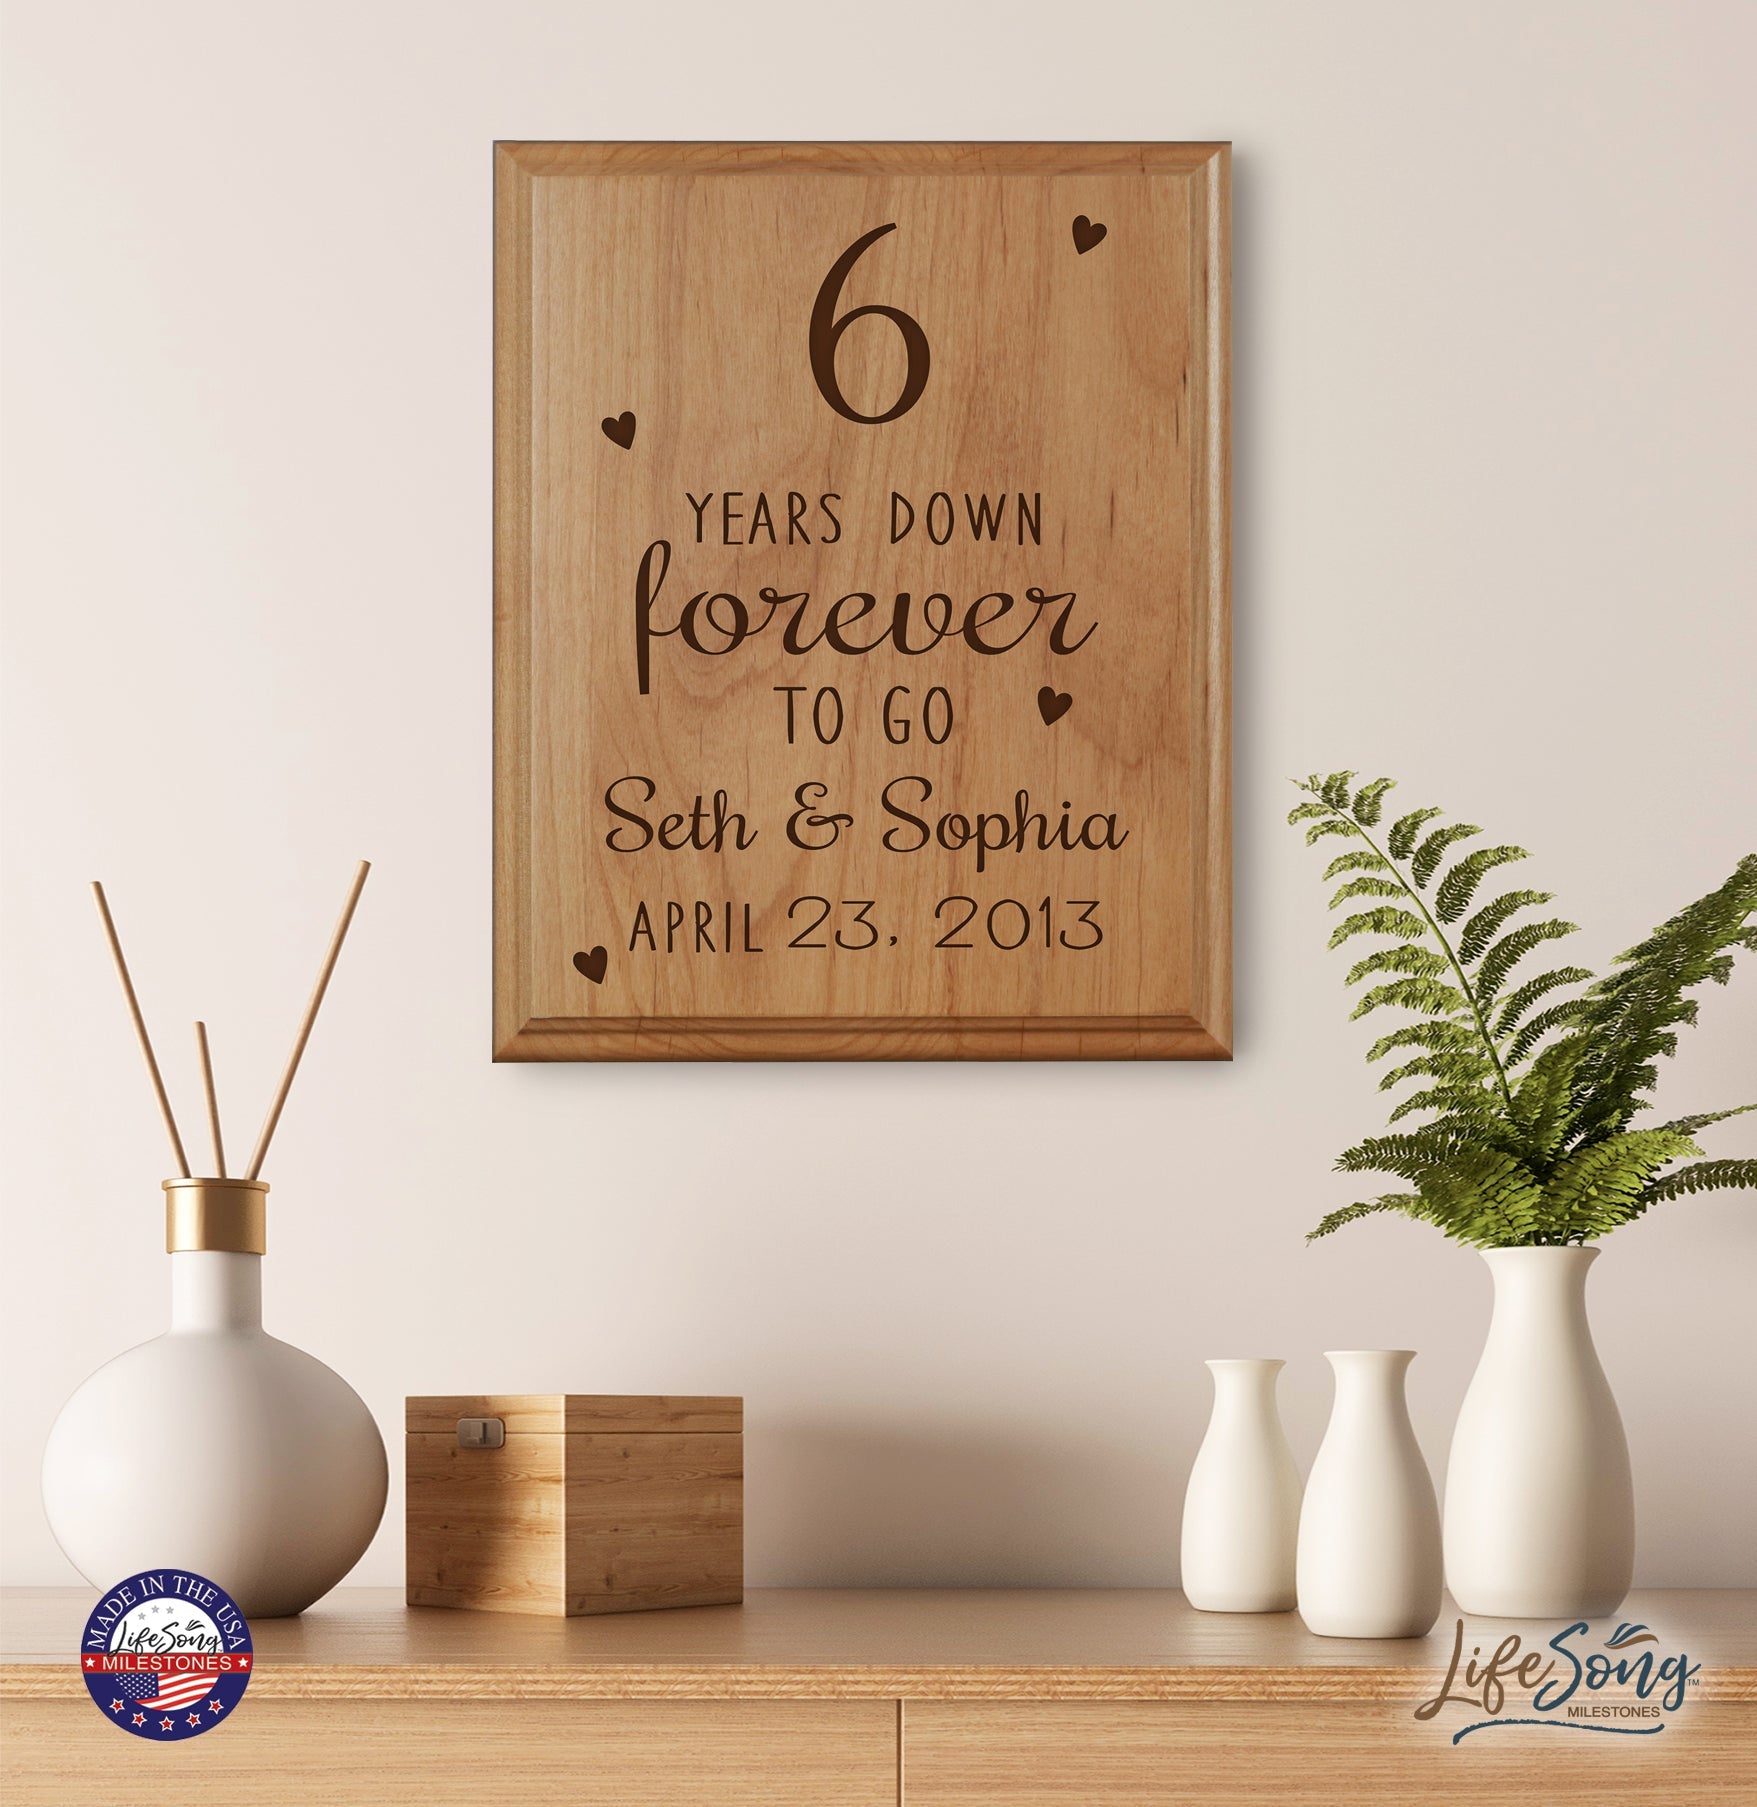 Personalized Wedding Anniversary Hanging Wall Plaque - 6th - LifeSong Milestones